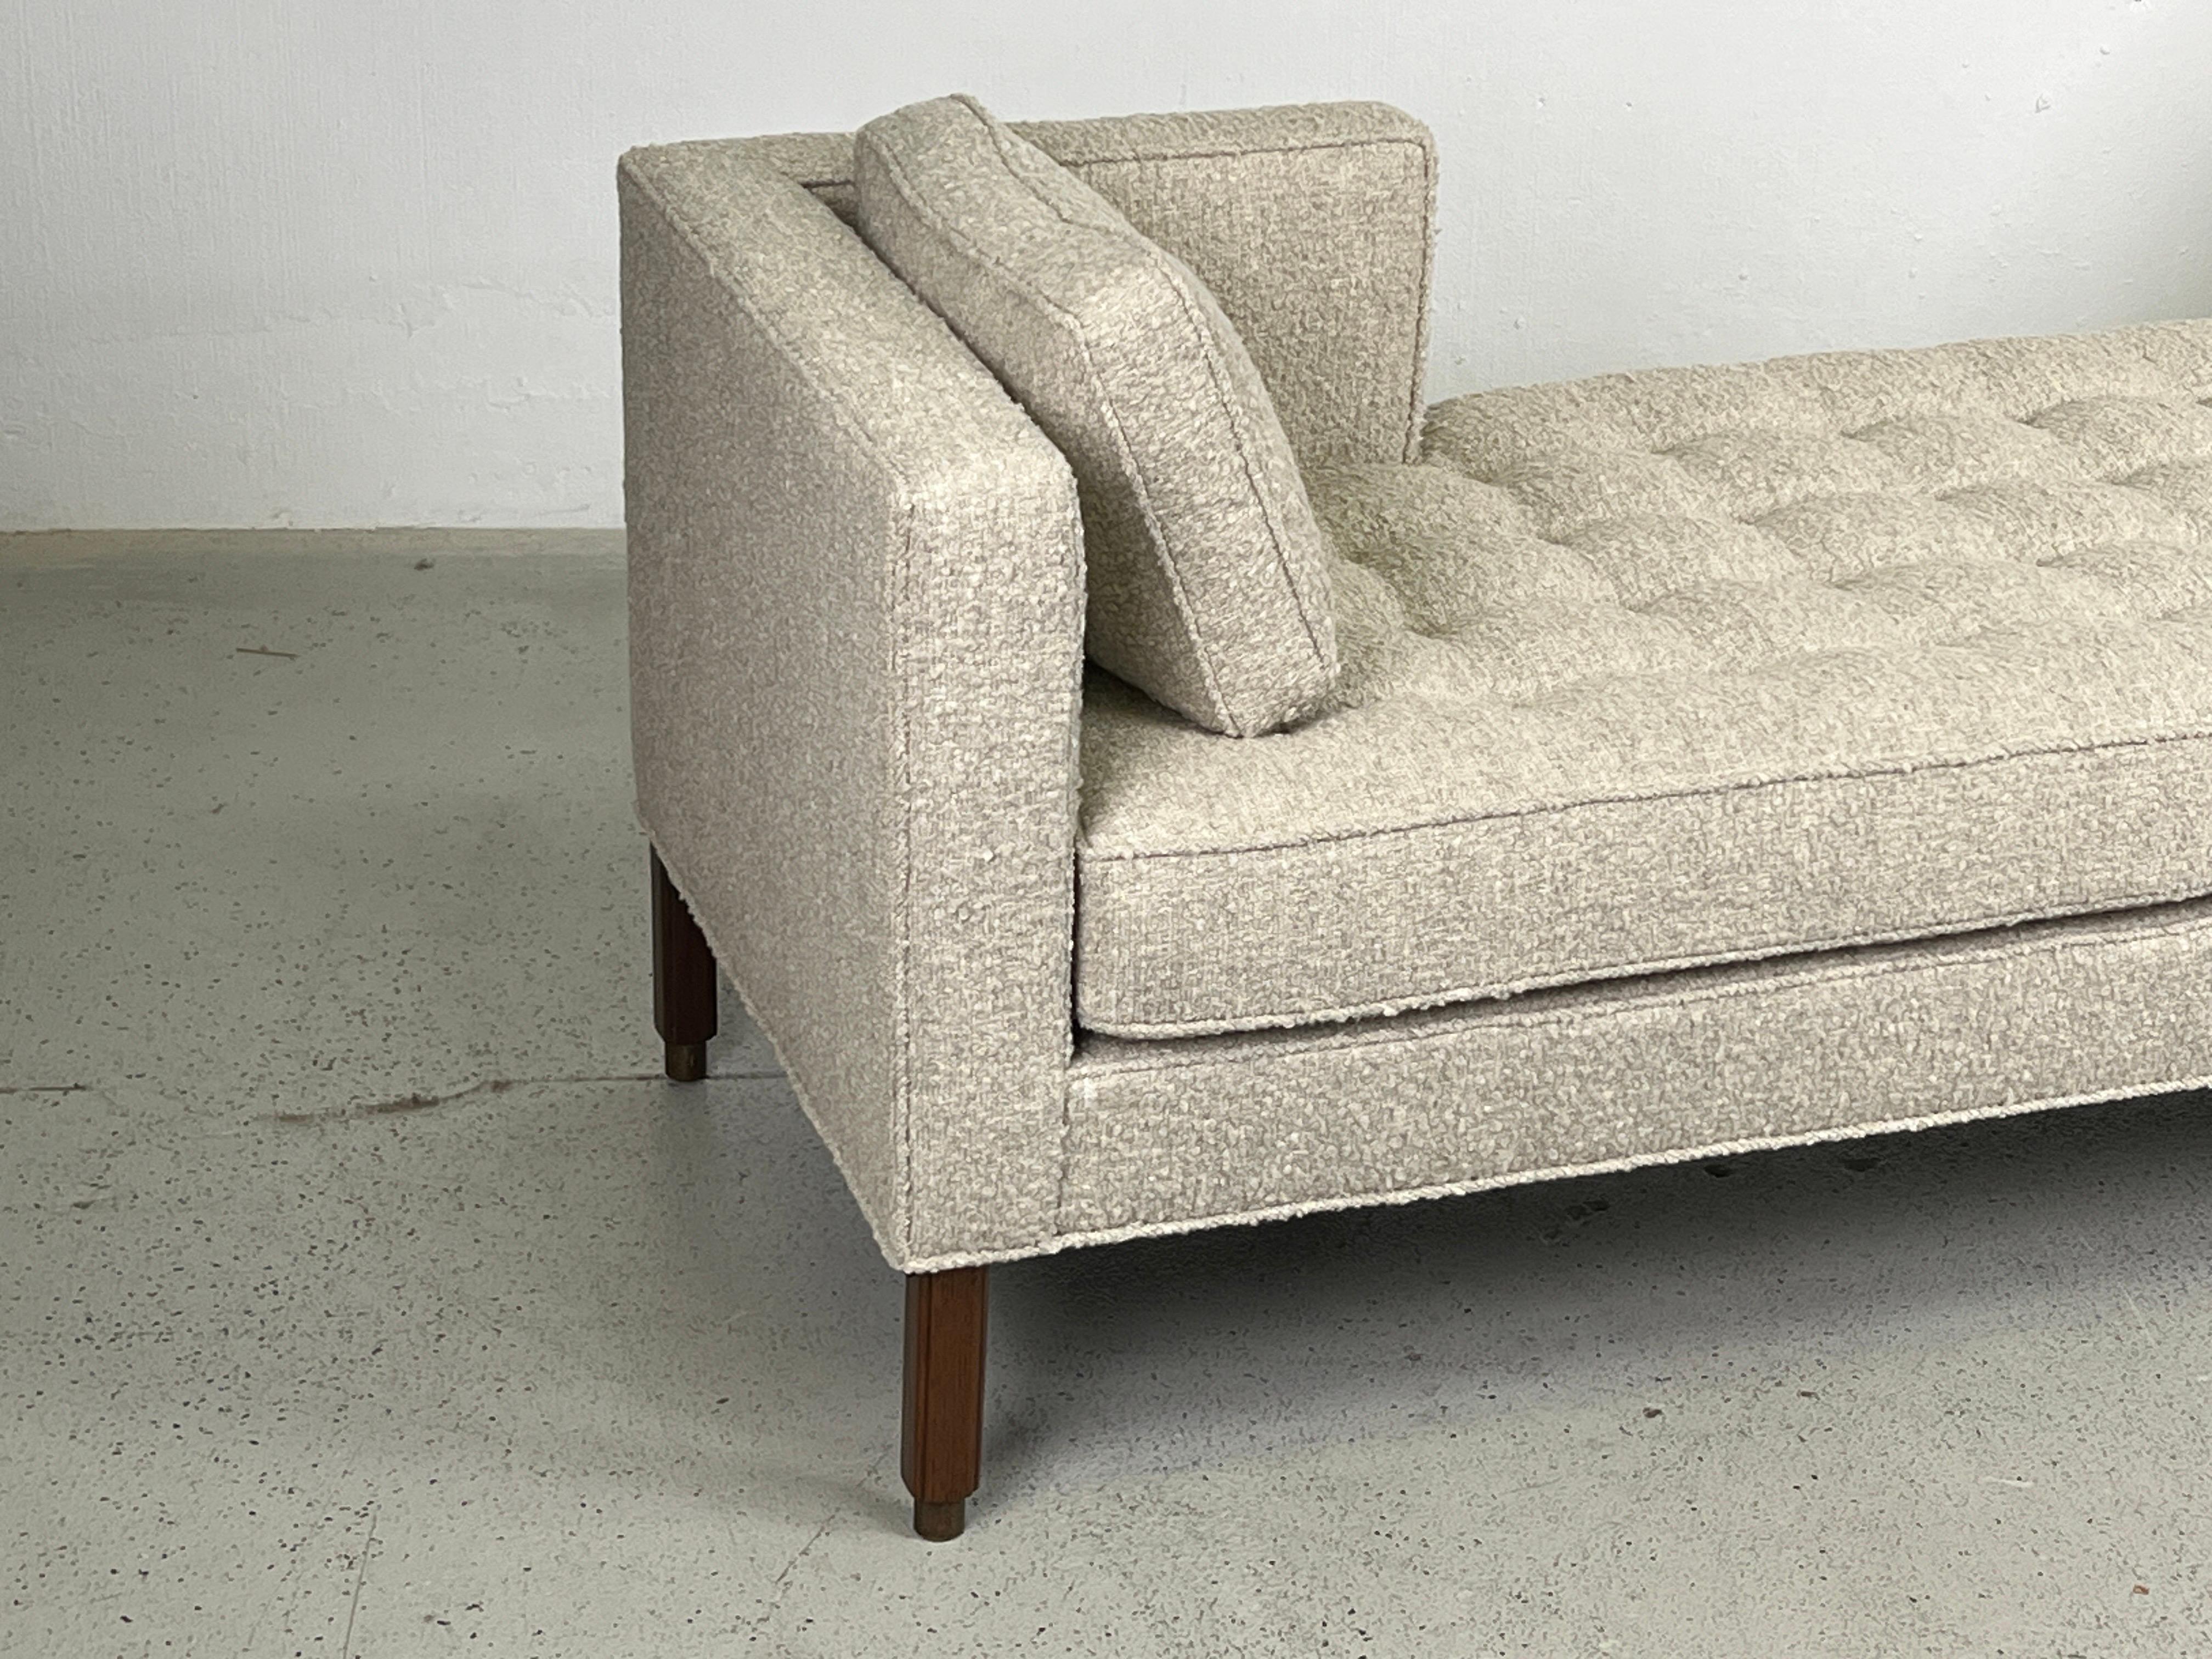 Tete-a-Tete sofa / daybed with walnut base and brass feet. Reupholstered in Holly hunt / Teton / Cliffside fabric. Designed by Edward Wormley for Dunbar.